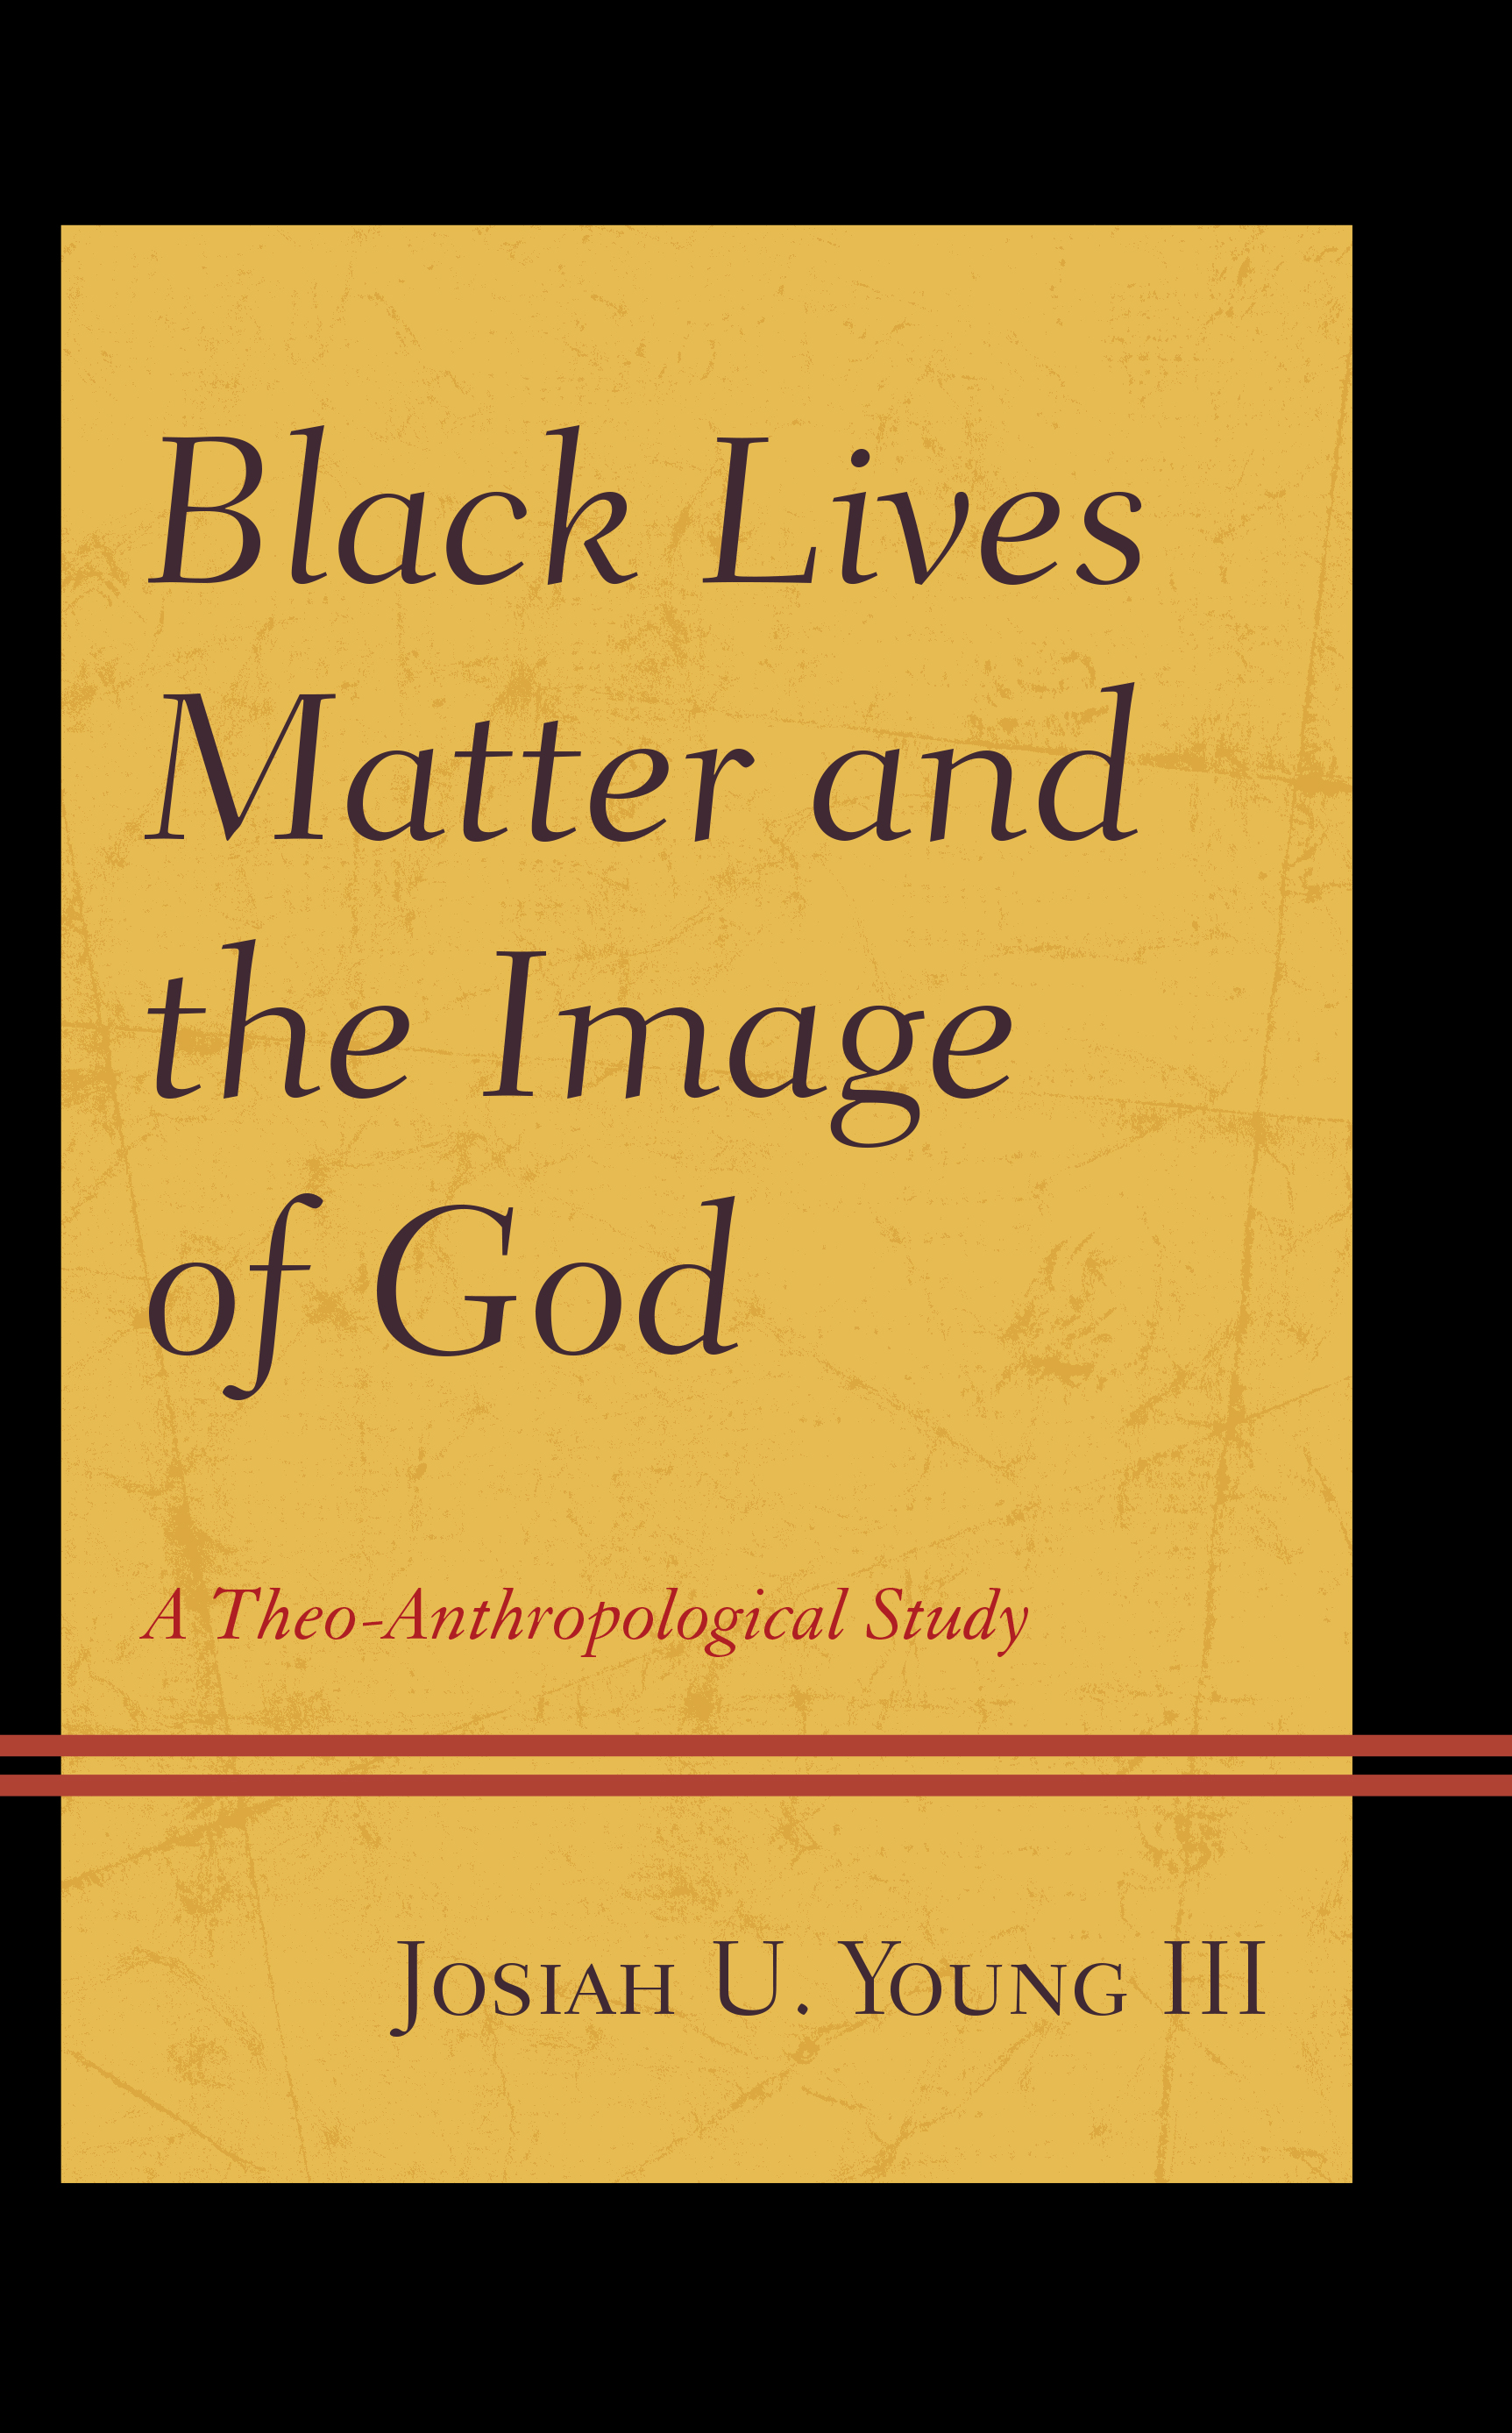 Black Lives Matter and the Image of God: A Theo-Anthropological Study